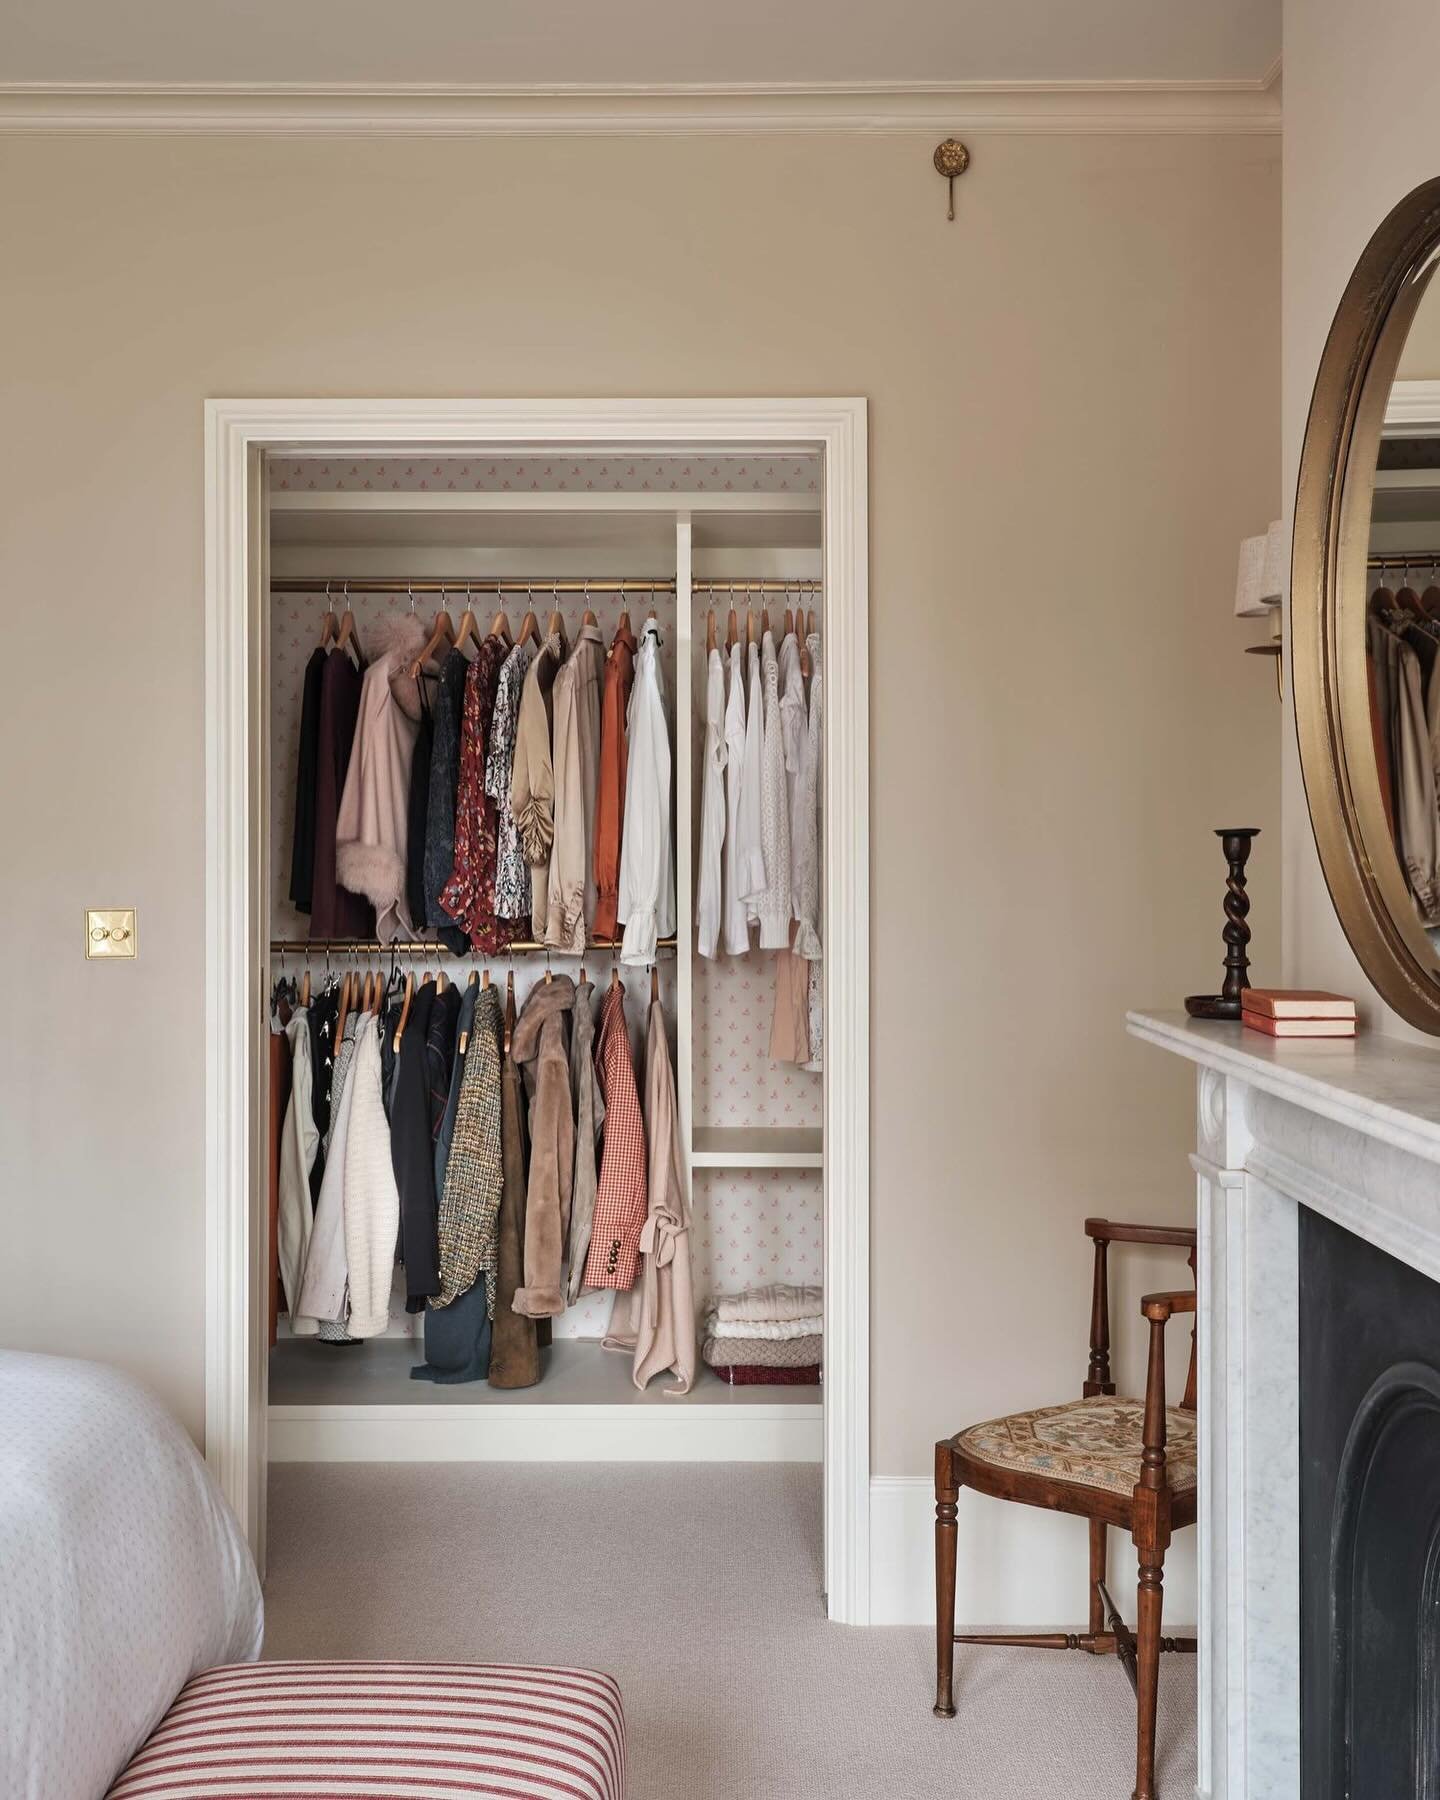 Farrow &amp; Ball Friday! 

We have all-ready featured the Main Bedroom &amp; Dressing Room on our profile but not shown how they work together! Designing rooms within a home that are adjacent to one and other can either be a complete juxtaposition w